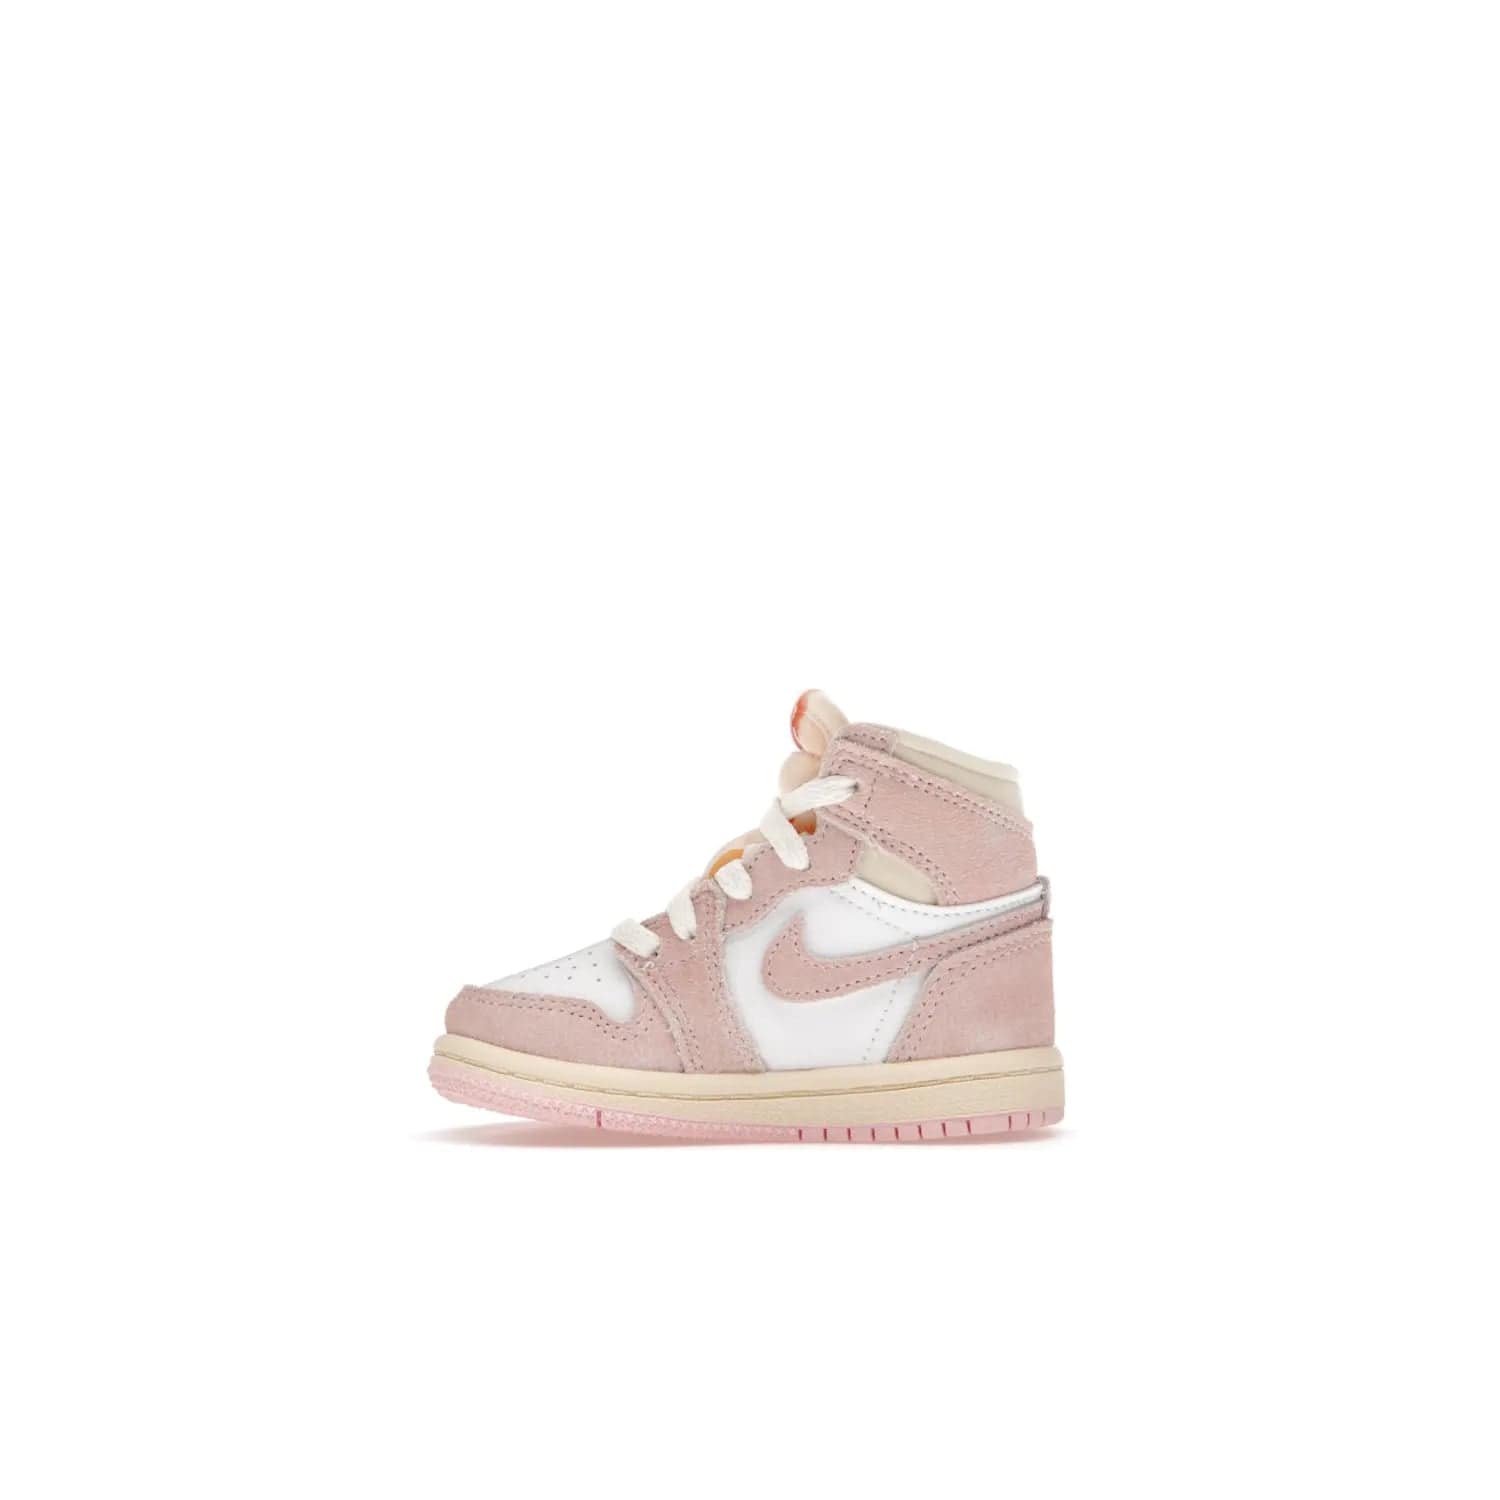 Jordan 1 Retro High OG Washed Pink (TD) - Image 19 - Only at www.BallersClubKickz.com - Retro style meets modern comfort: Introducing the Jordan 1 High OG Washed Pink (TD). Combining Atmosphere/White/Muslin/Sail colors with a high-rise silhouette, these shoes will be an instant classic when they release April 22, 2023.